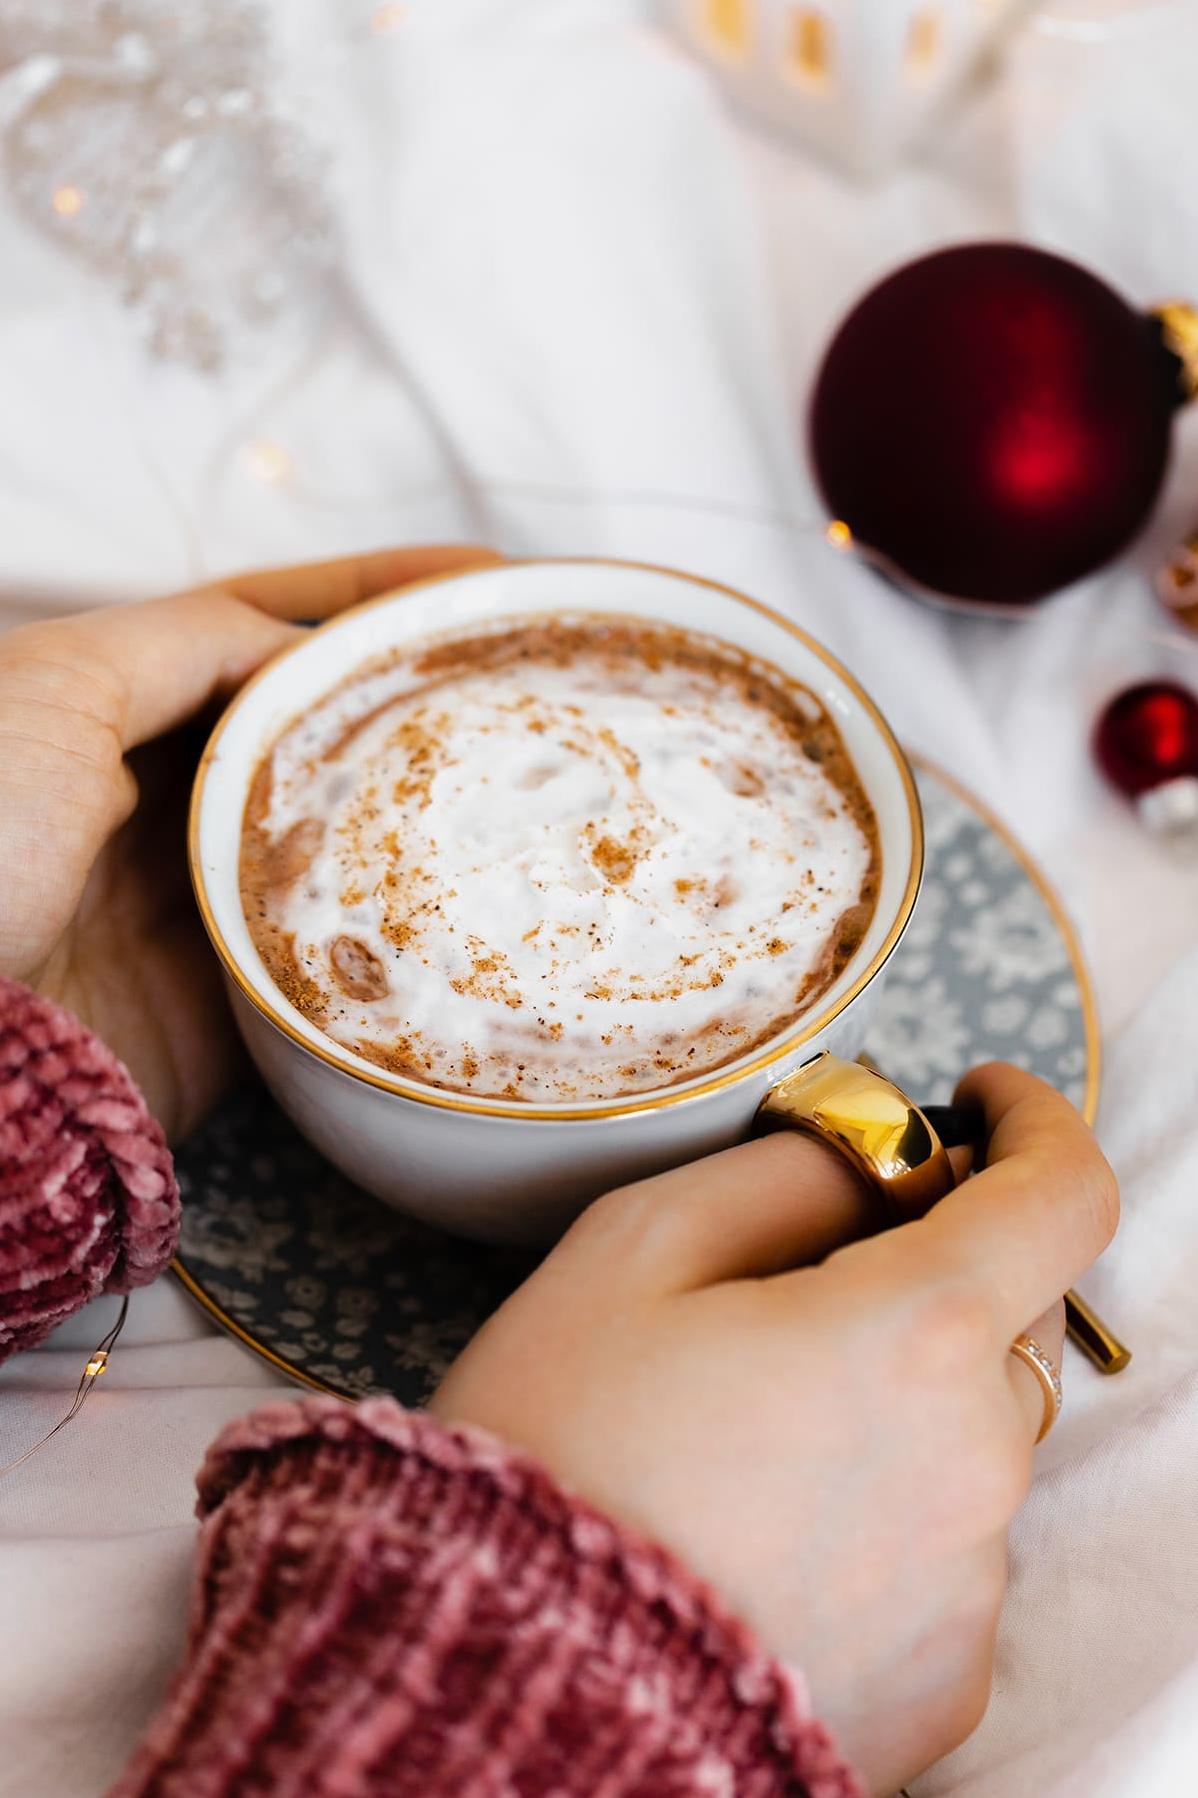  A warm and comforting chocolate eggnog latte is just what the doctor ordered on a chilly day.